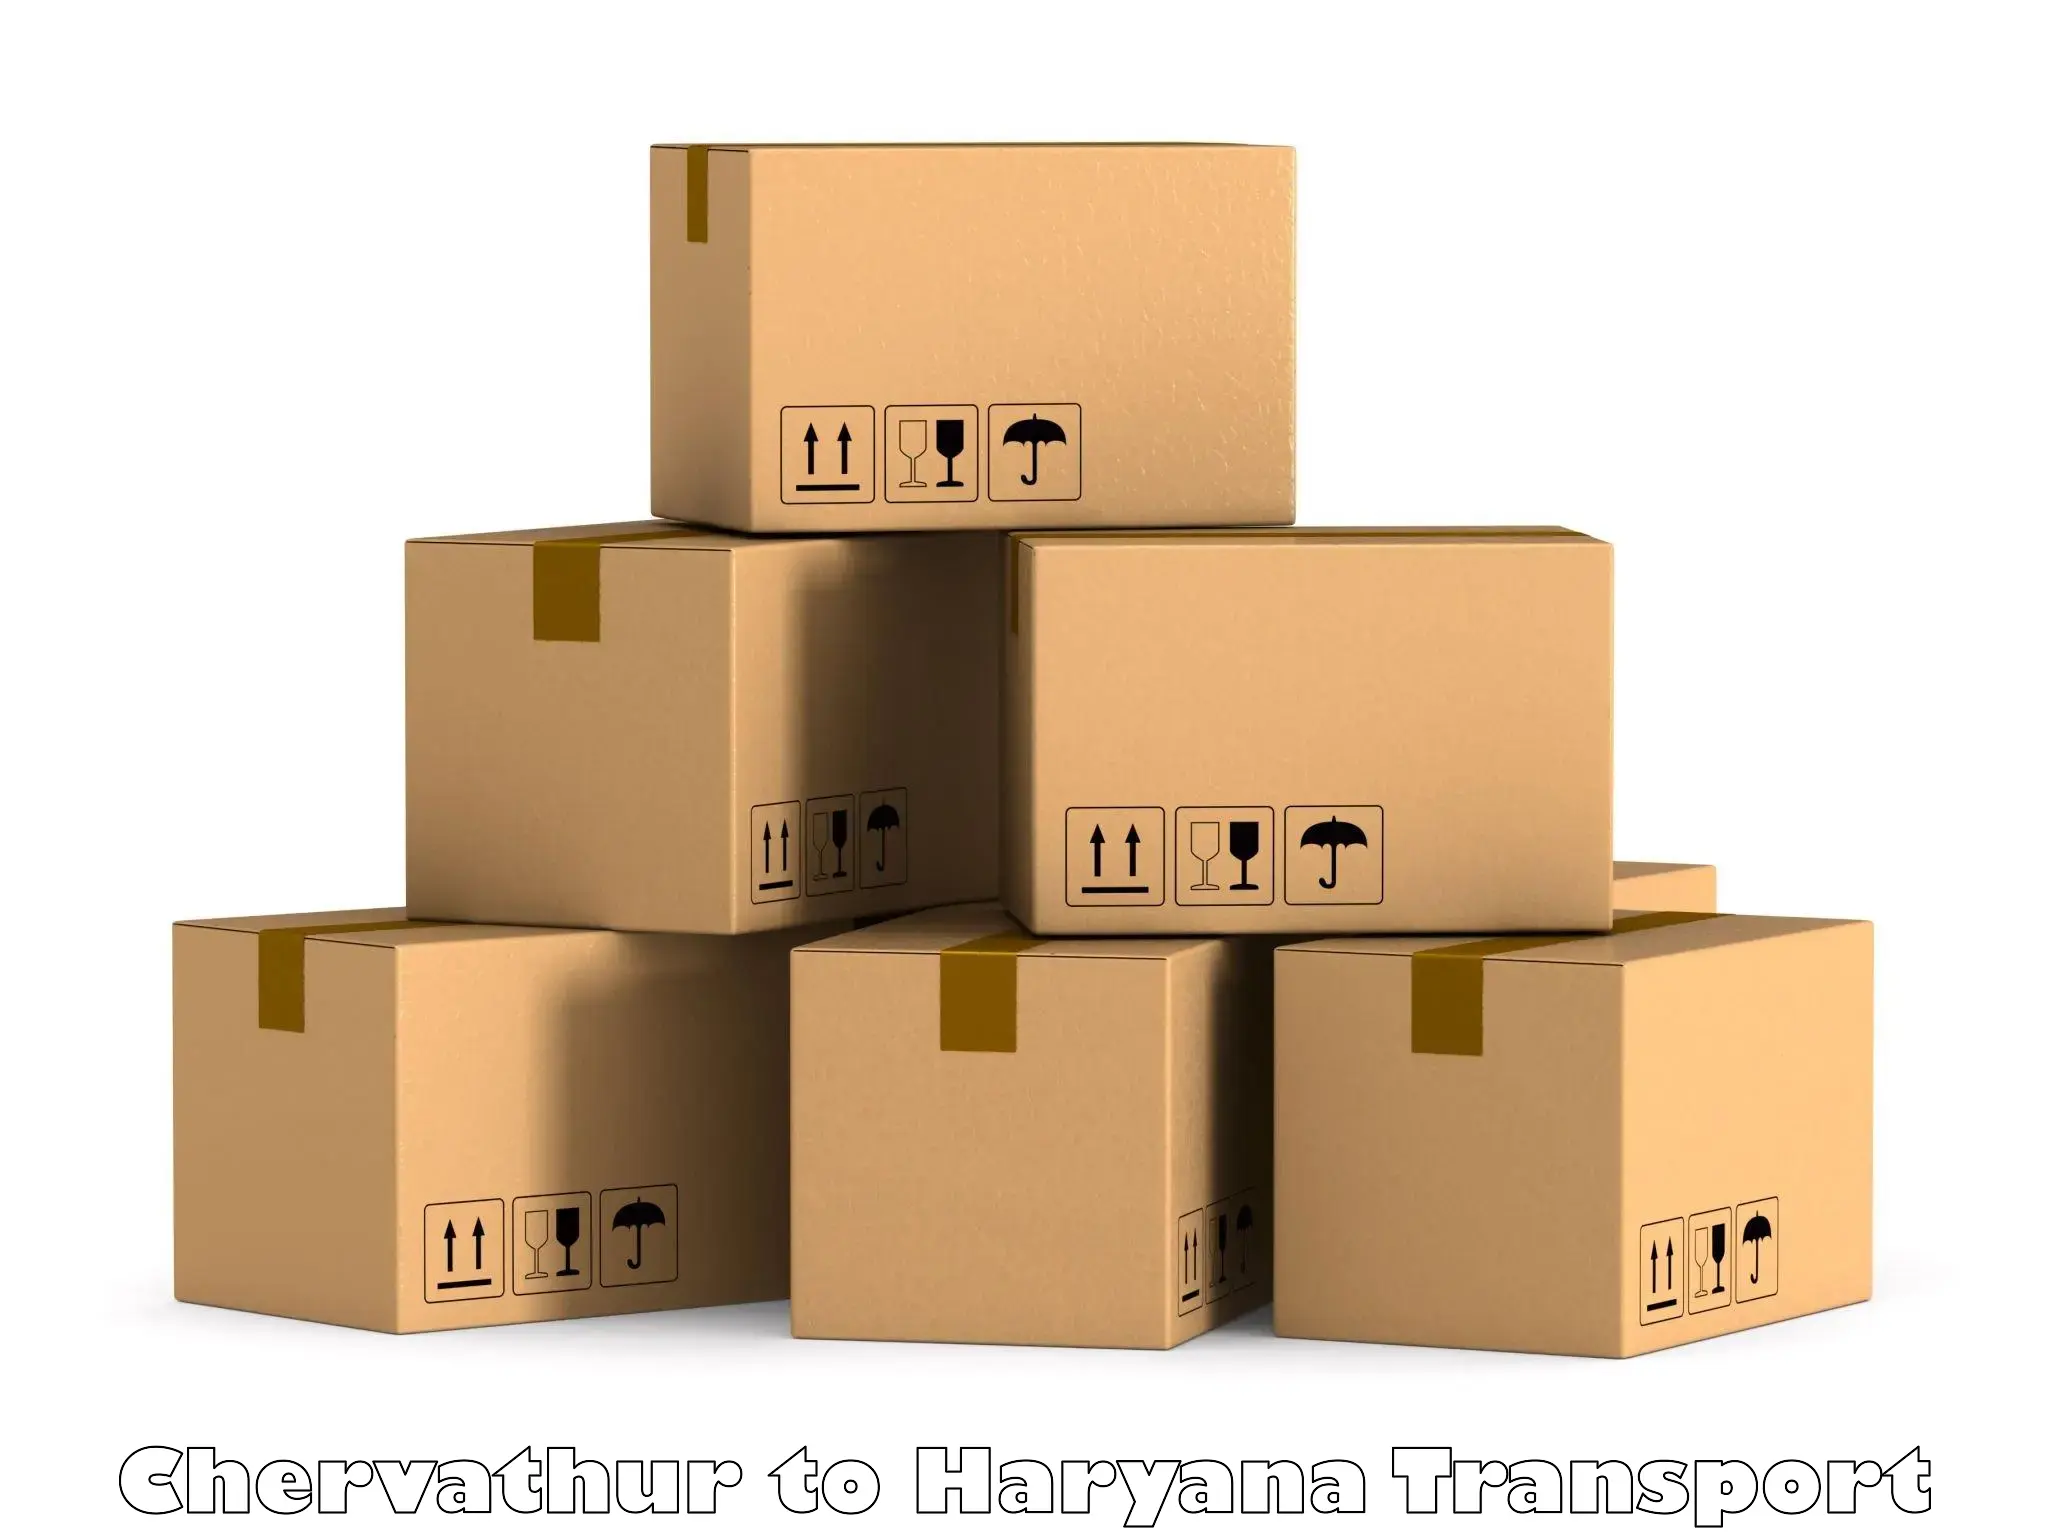 Nationwide transport services Chervathur to NCR Haryana